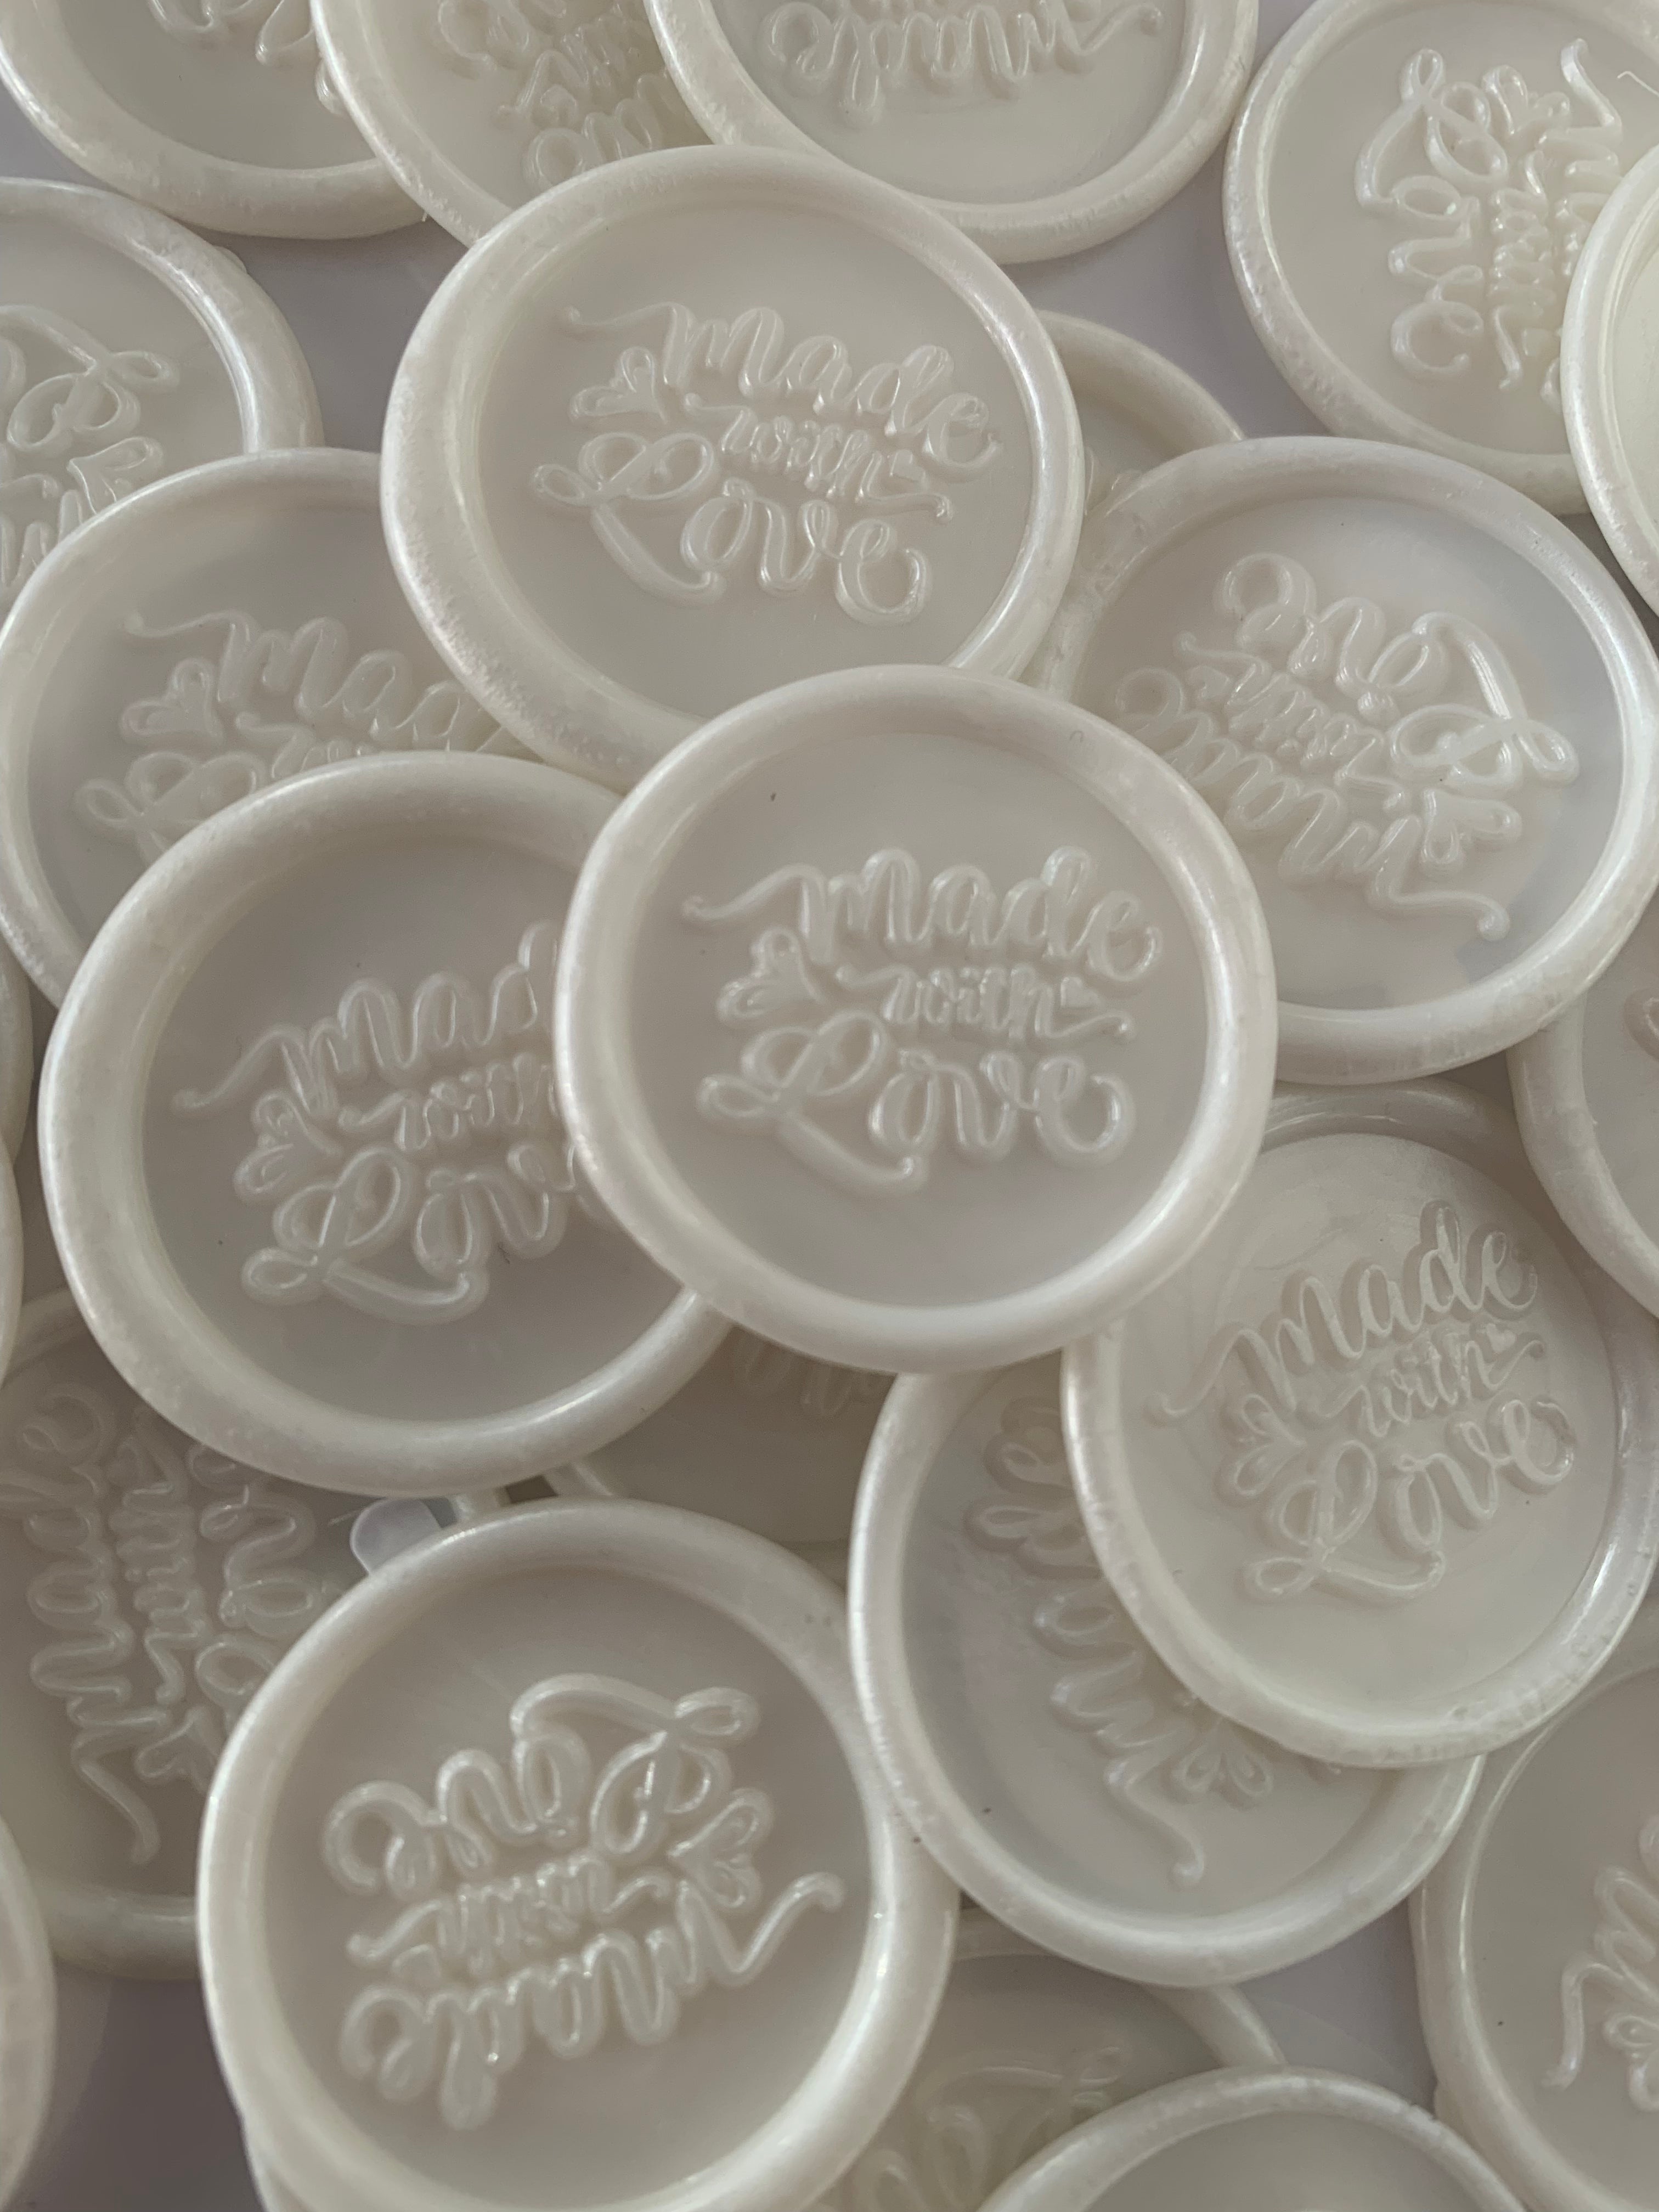 Made With Love White Ready Made Wax Seals 10pc